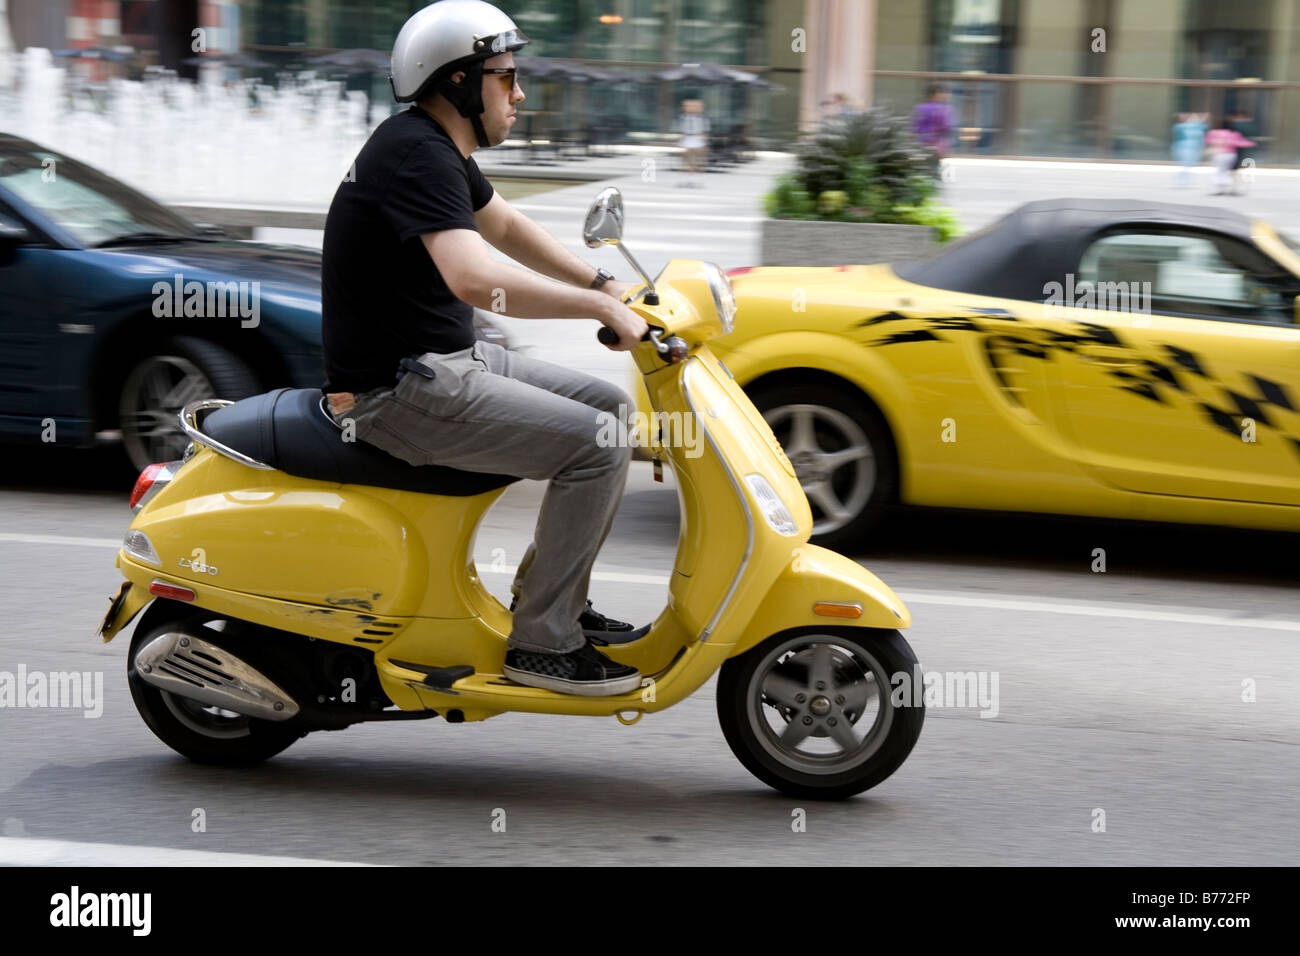 Man on a yellow scooter in traffic Stock Photo